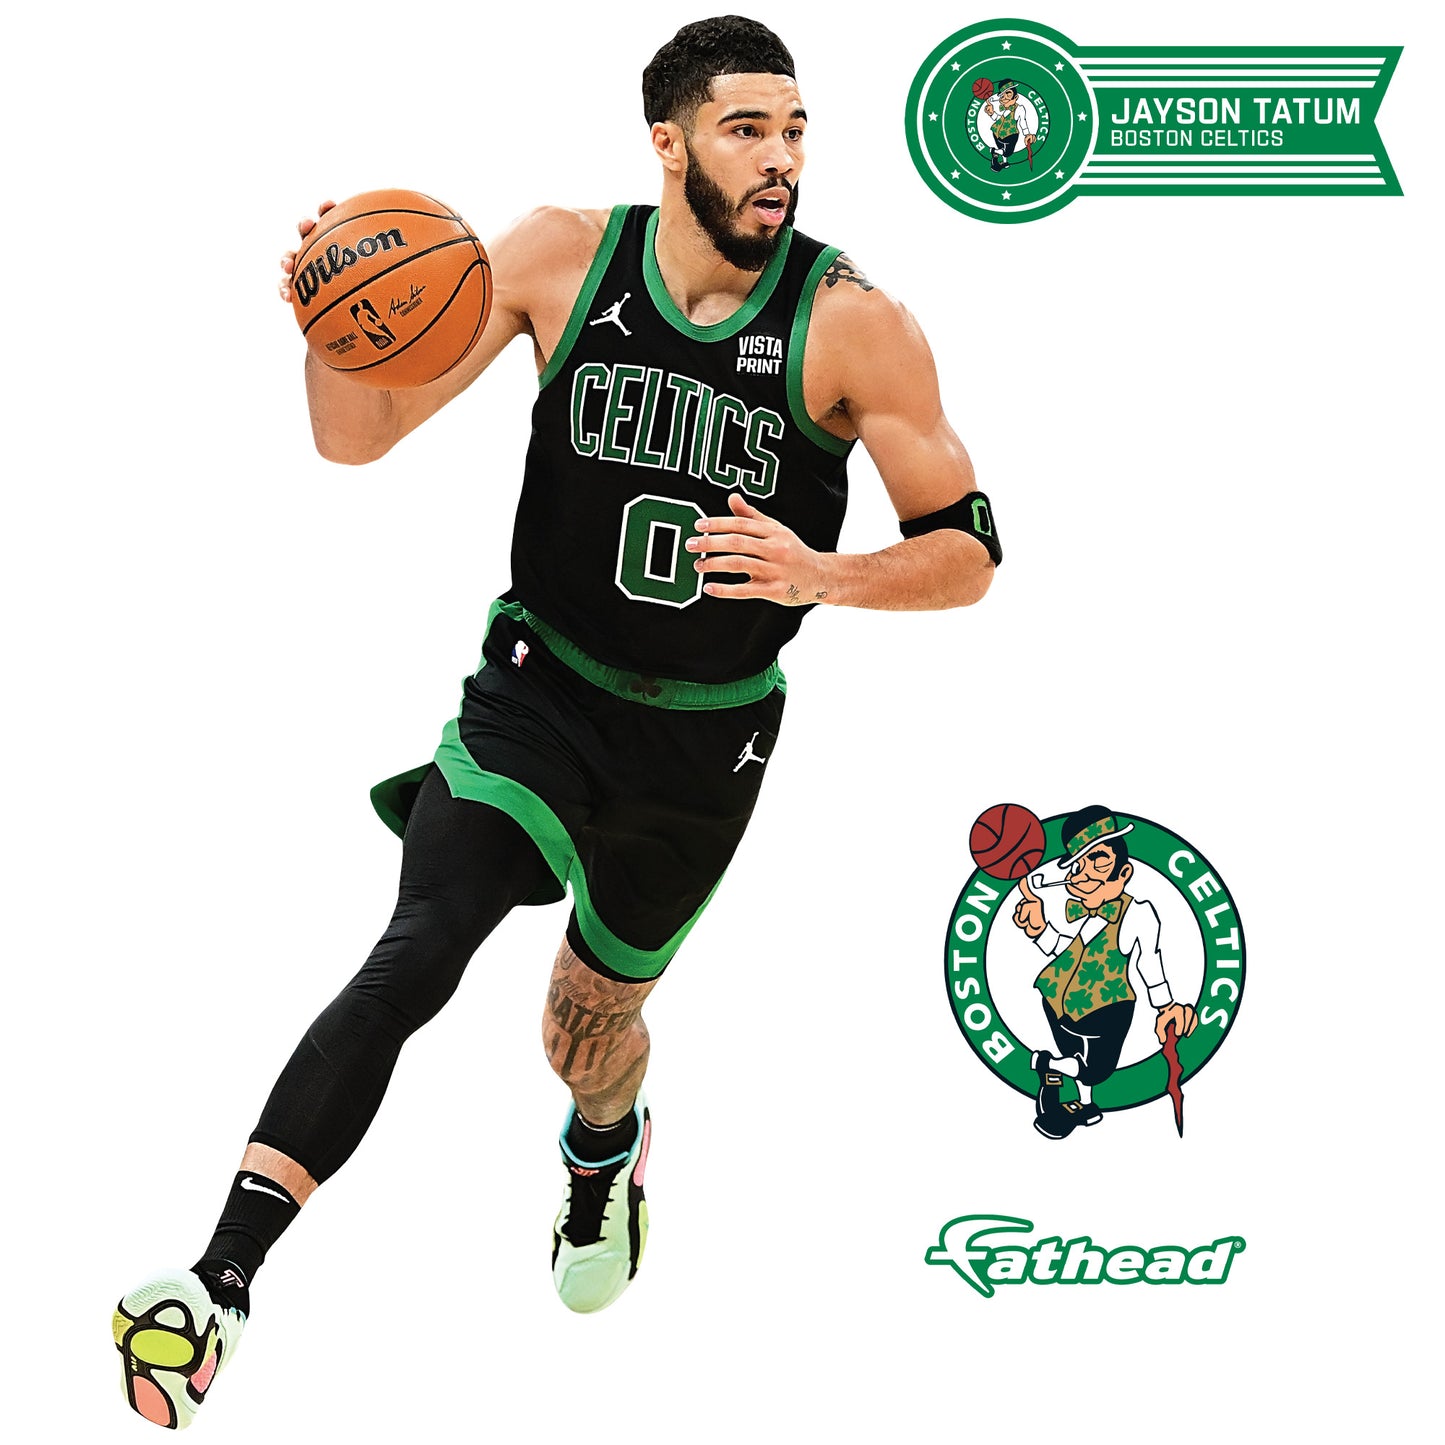 Boston Celtics: Jayson Tatum Statement Jersey        - Officially Licensed NBA Removable     Adhesive Decal